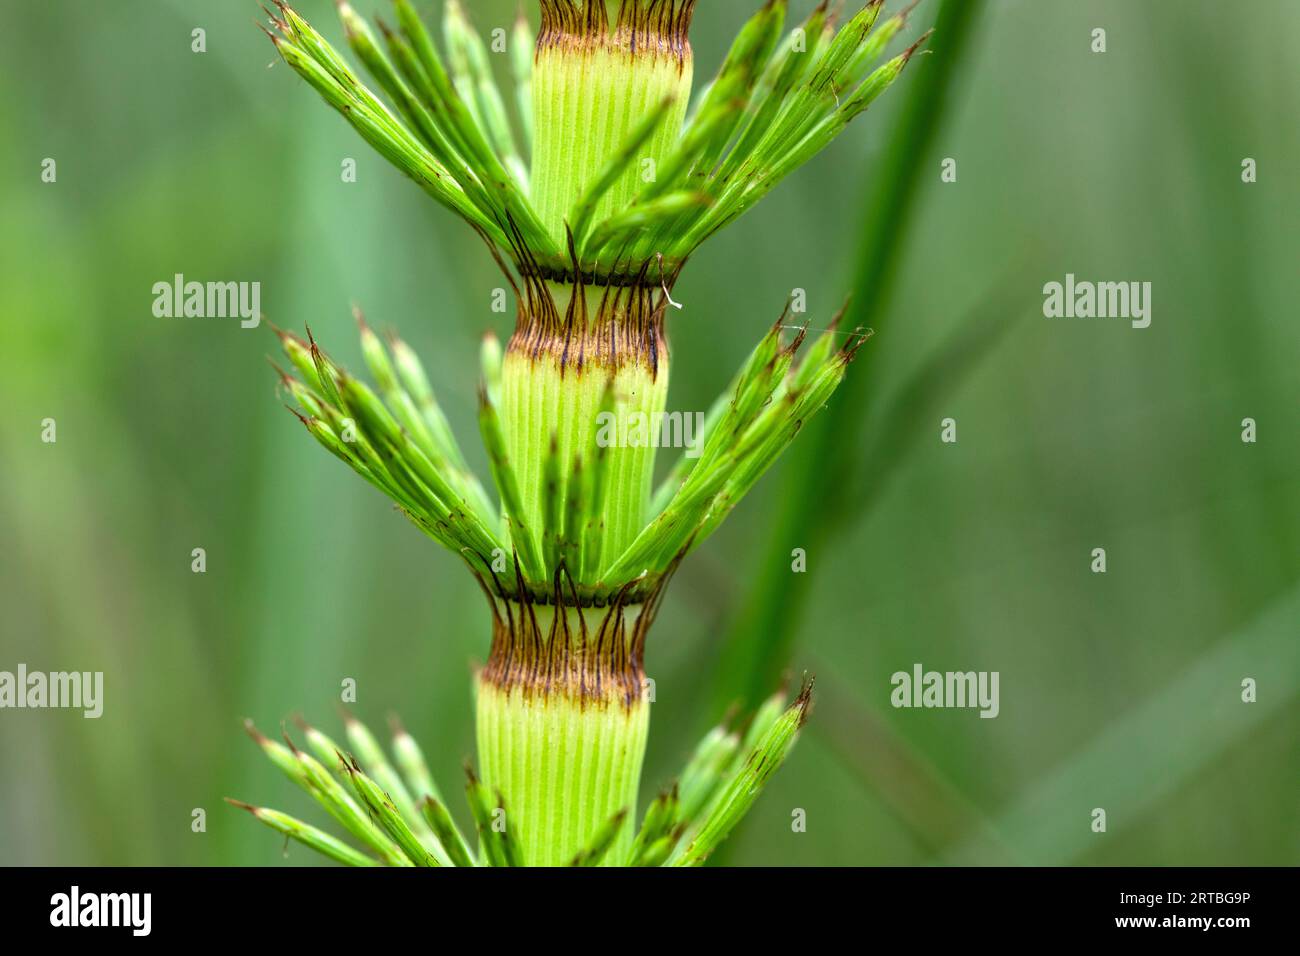 great horsetail, northern giant horsetail (Equisetum telmateia, Equisetum telmateja, Equisetum maximum), young stem, Netherlands, Frisia Stock Photo